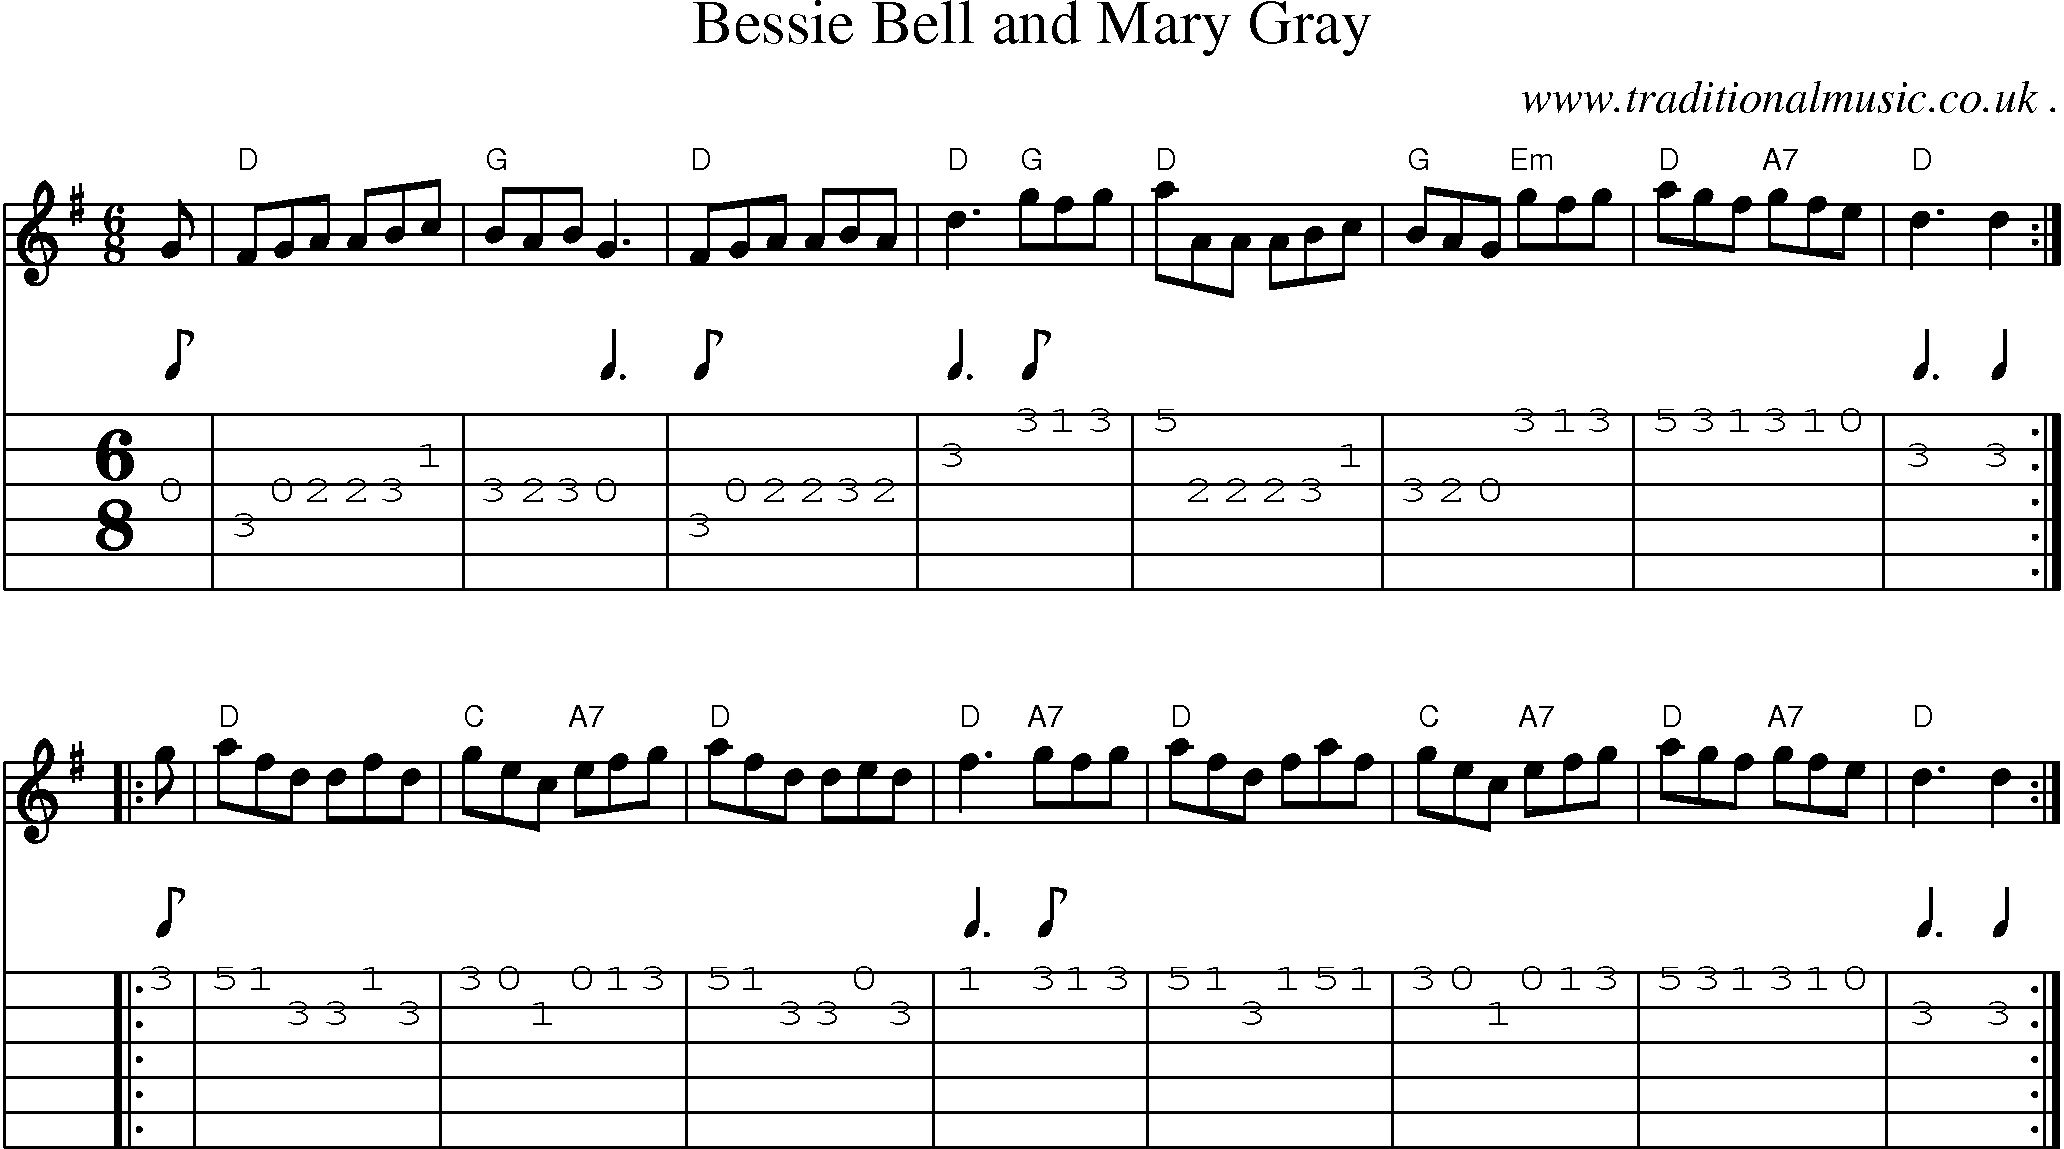 Sheet-music  score, Chords and Guitar Tabs for Bessie Bell And Mary Gray